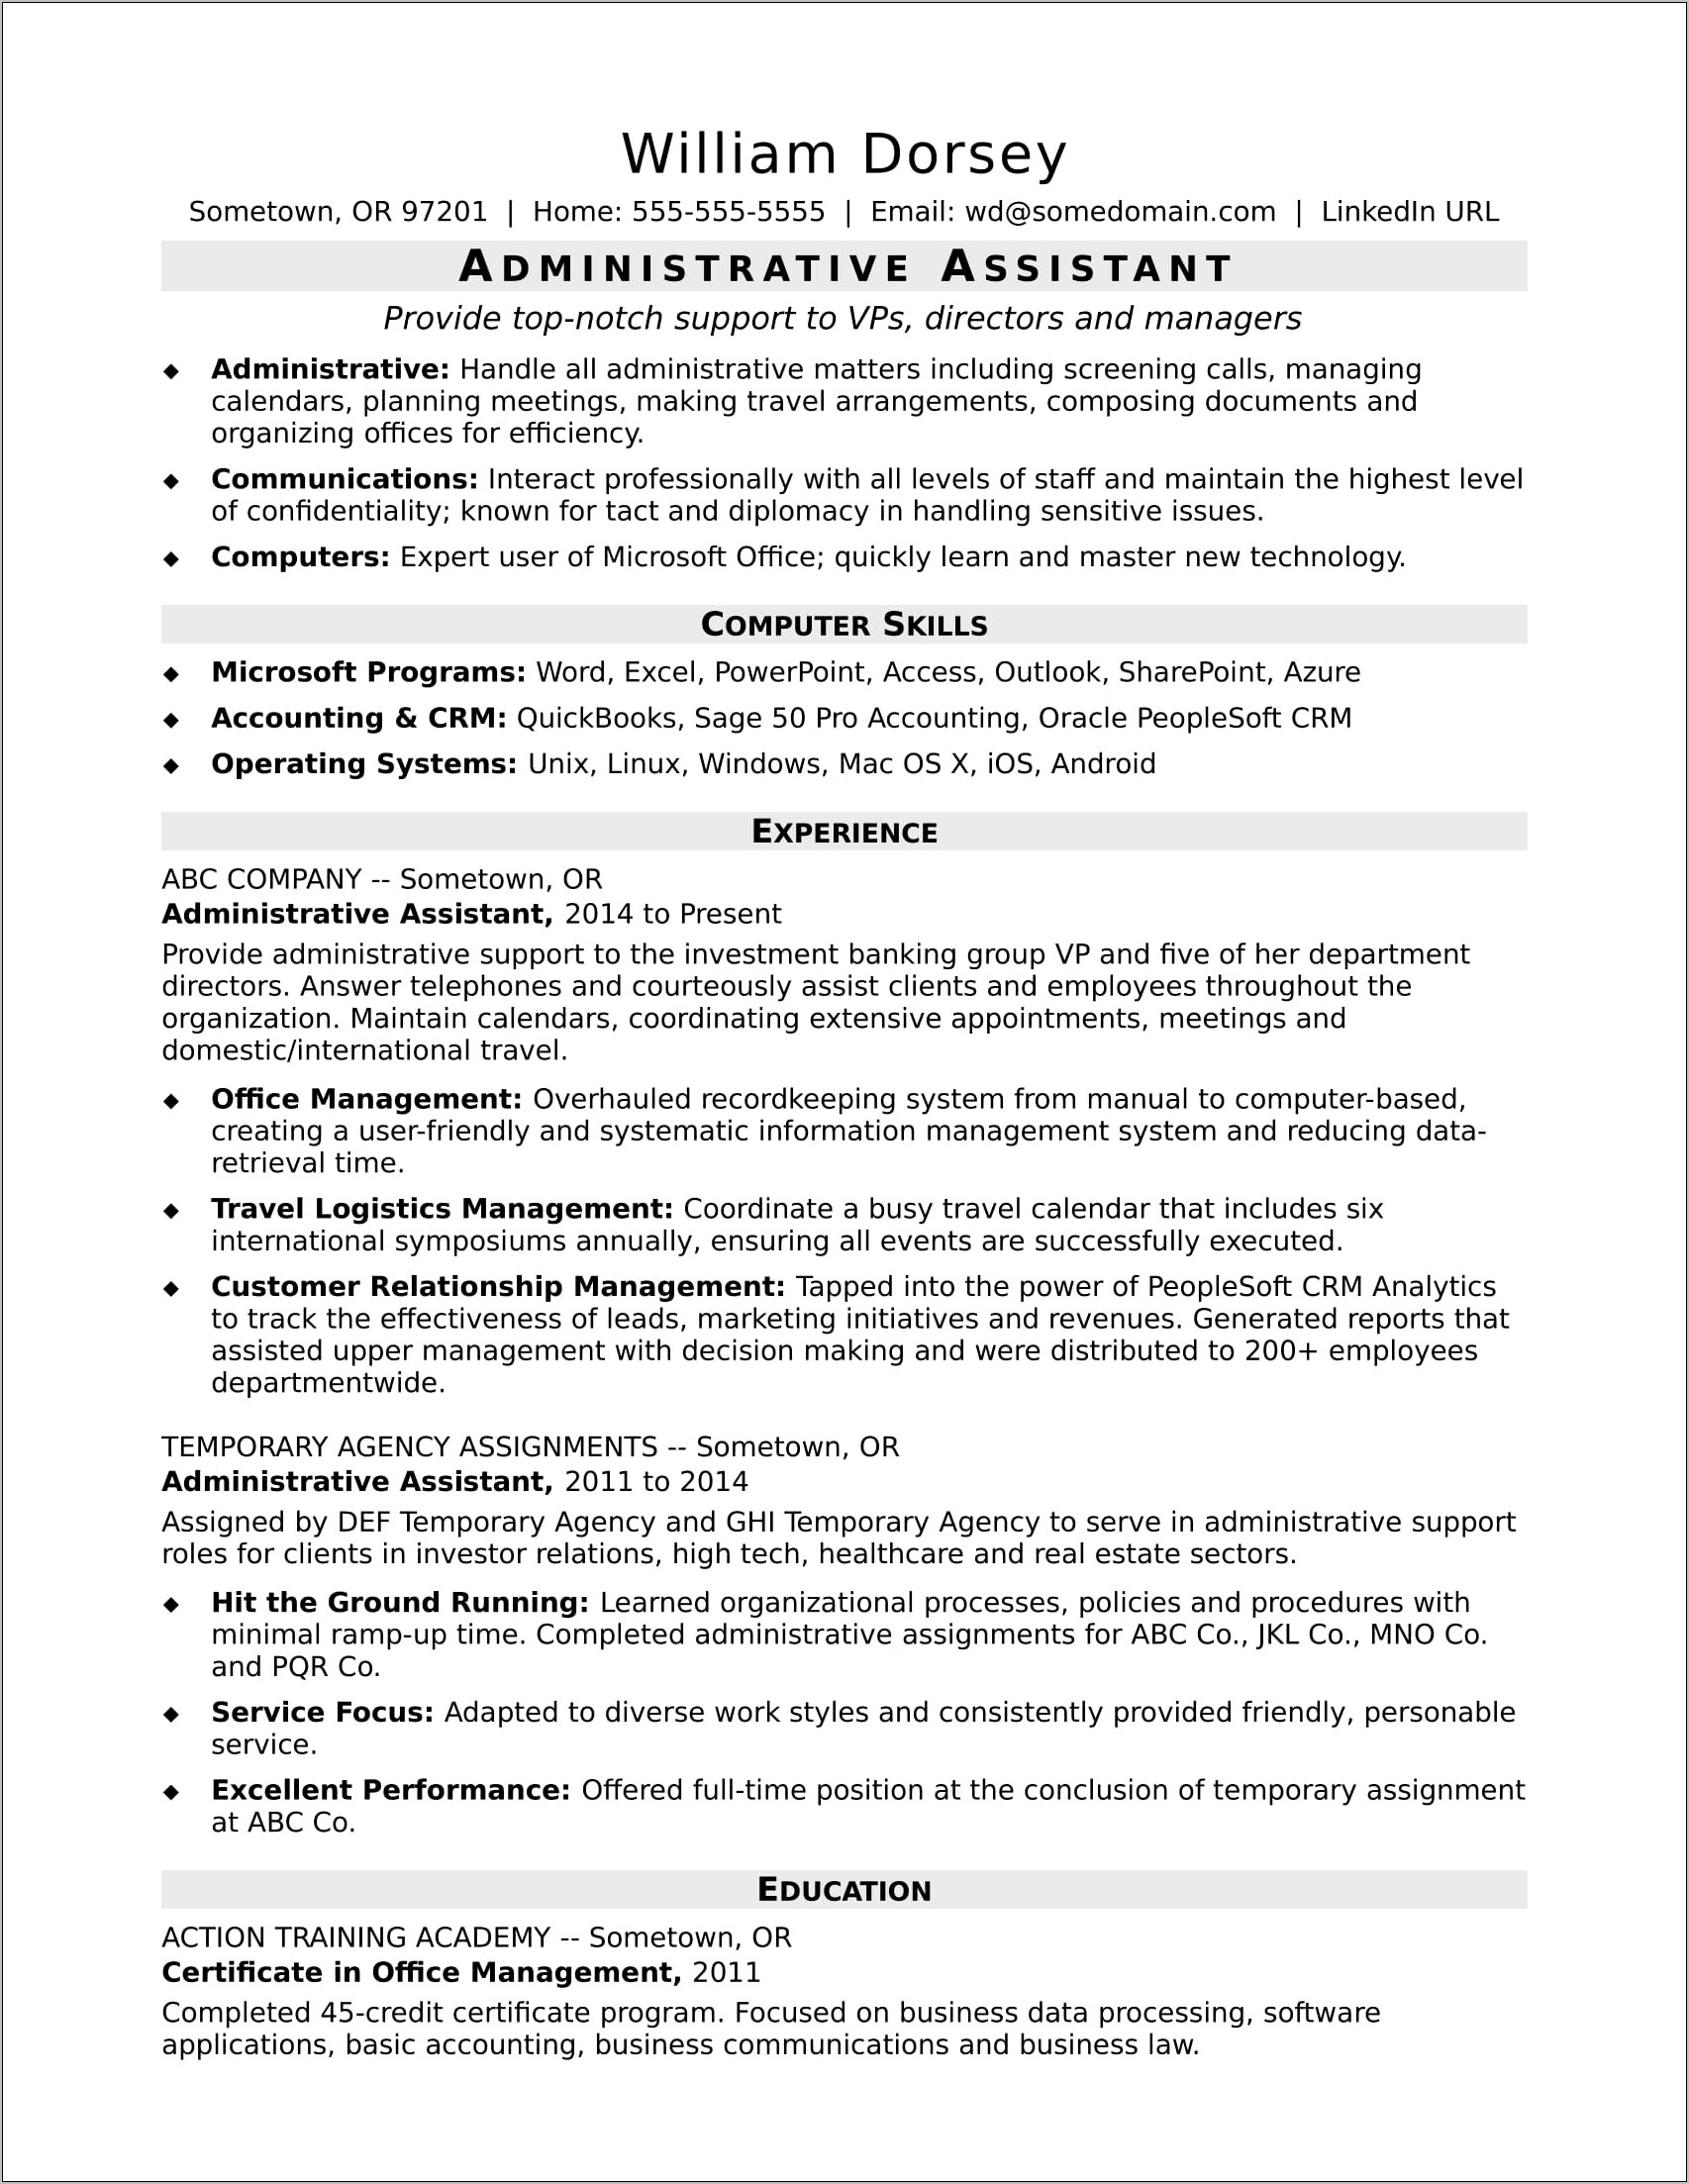 Resume Career Objective Examples Administrative